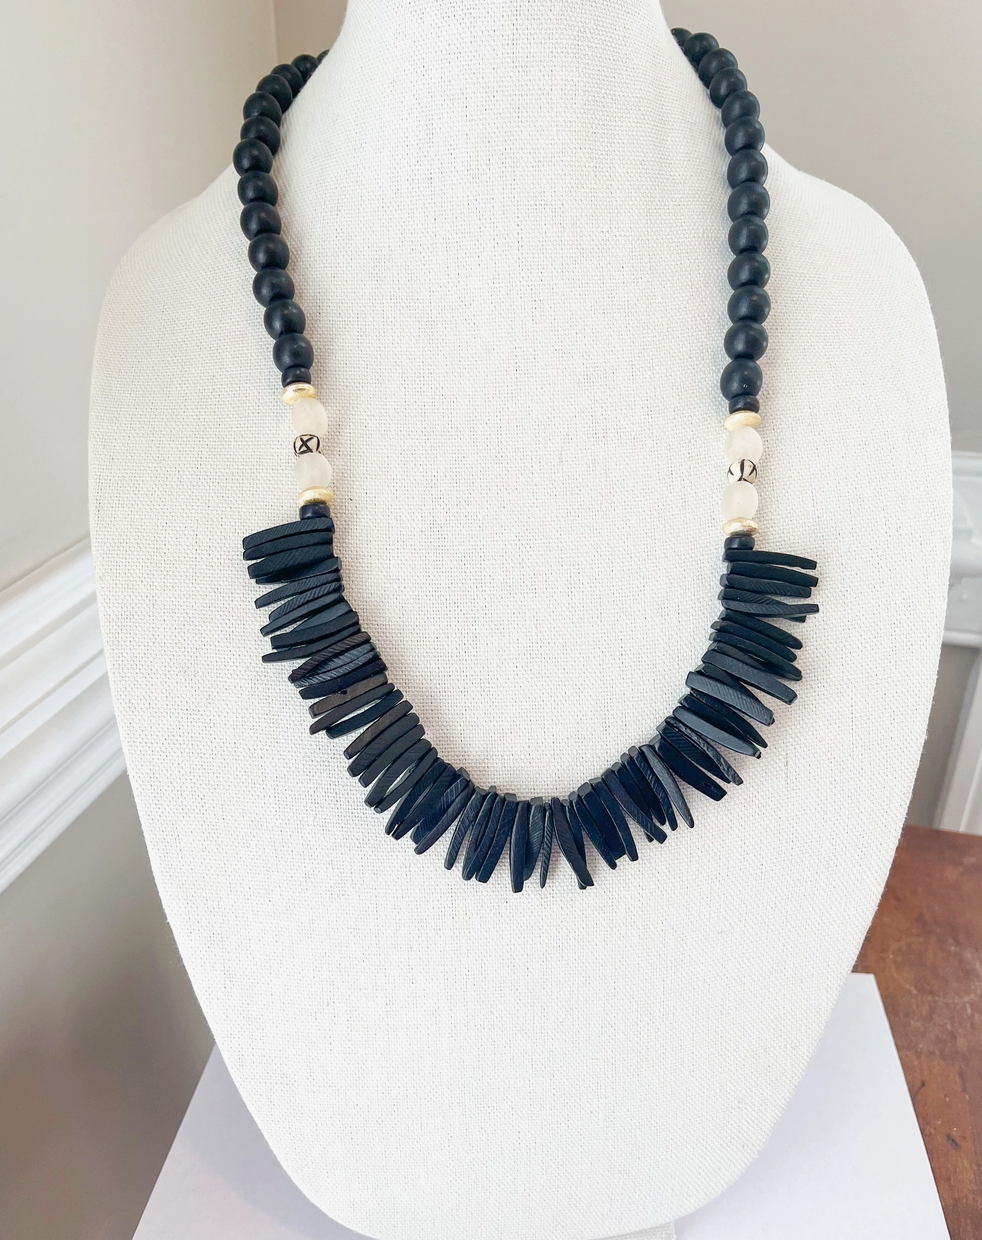 Black Wooden Bead Necklace from Southern Sunday